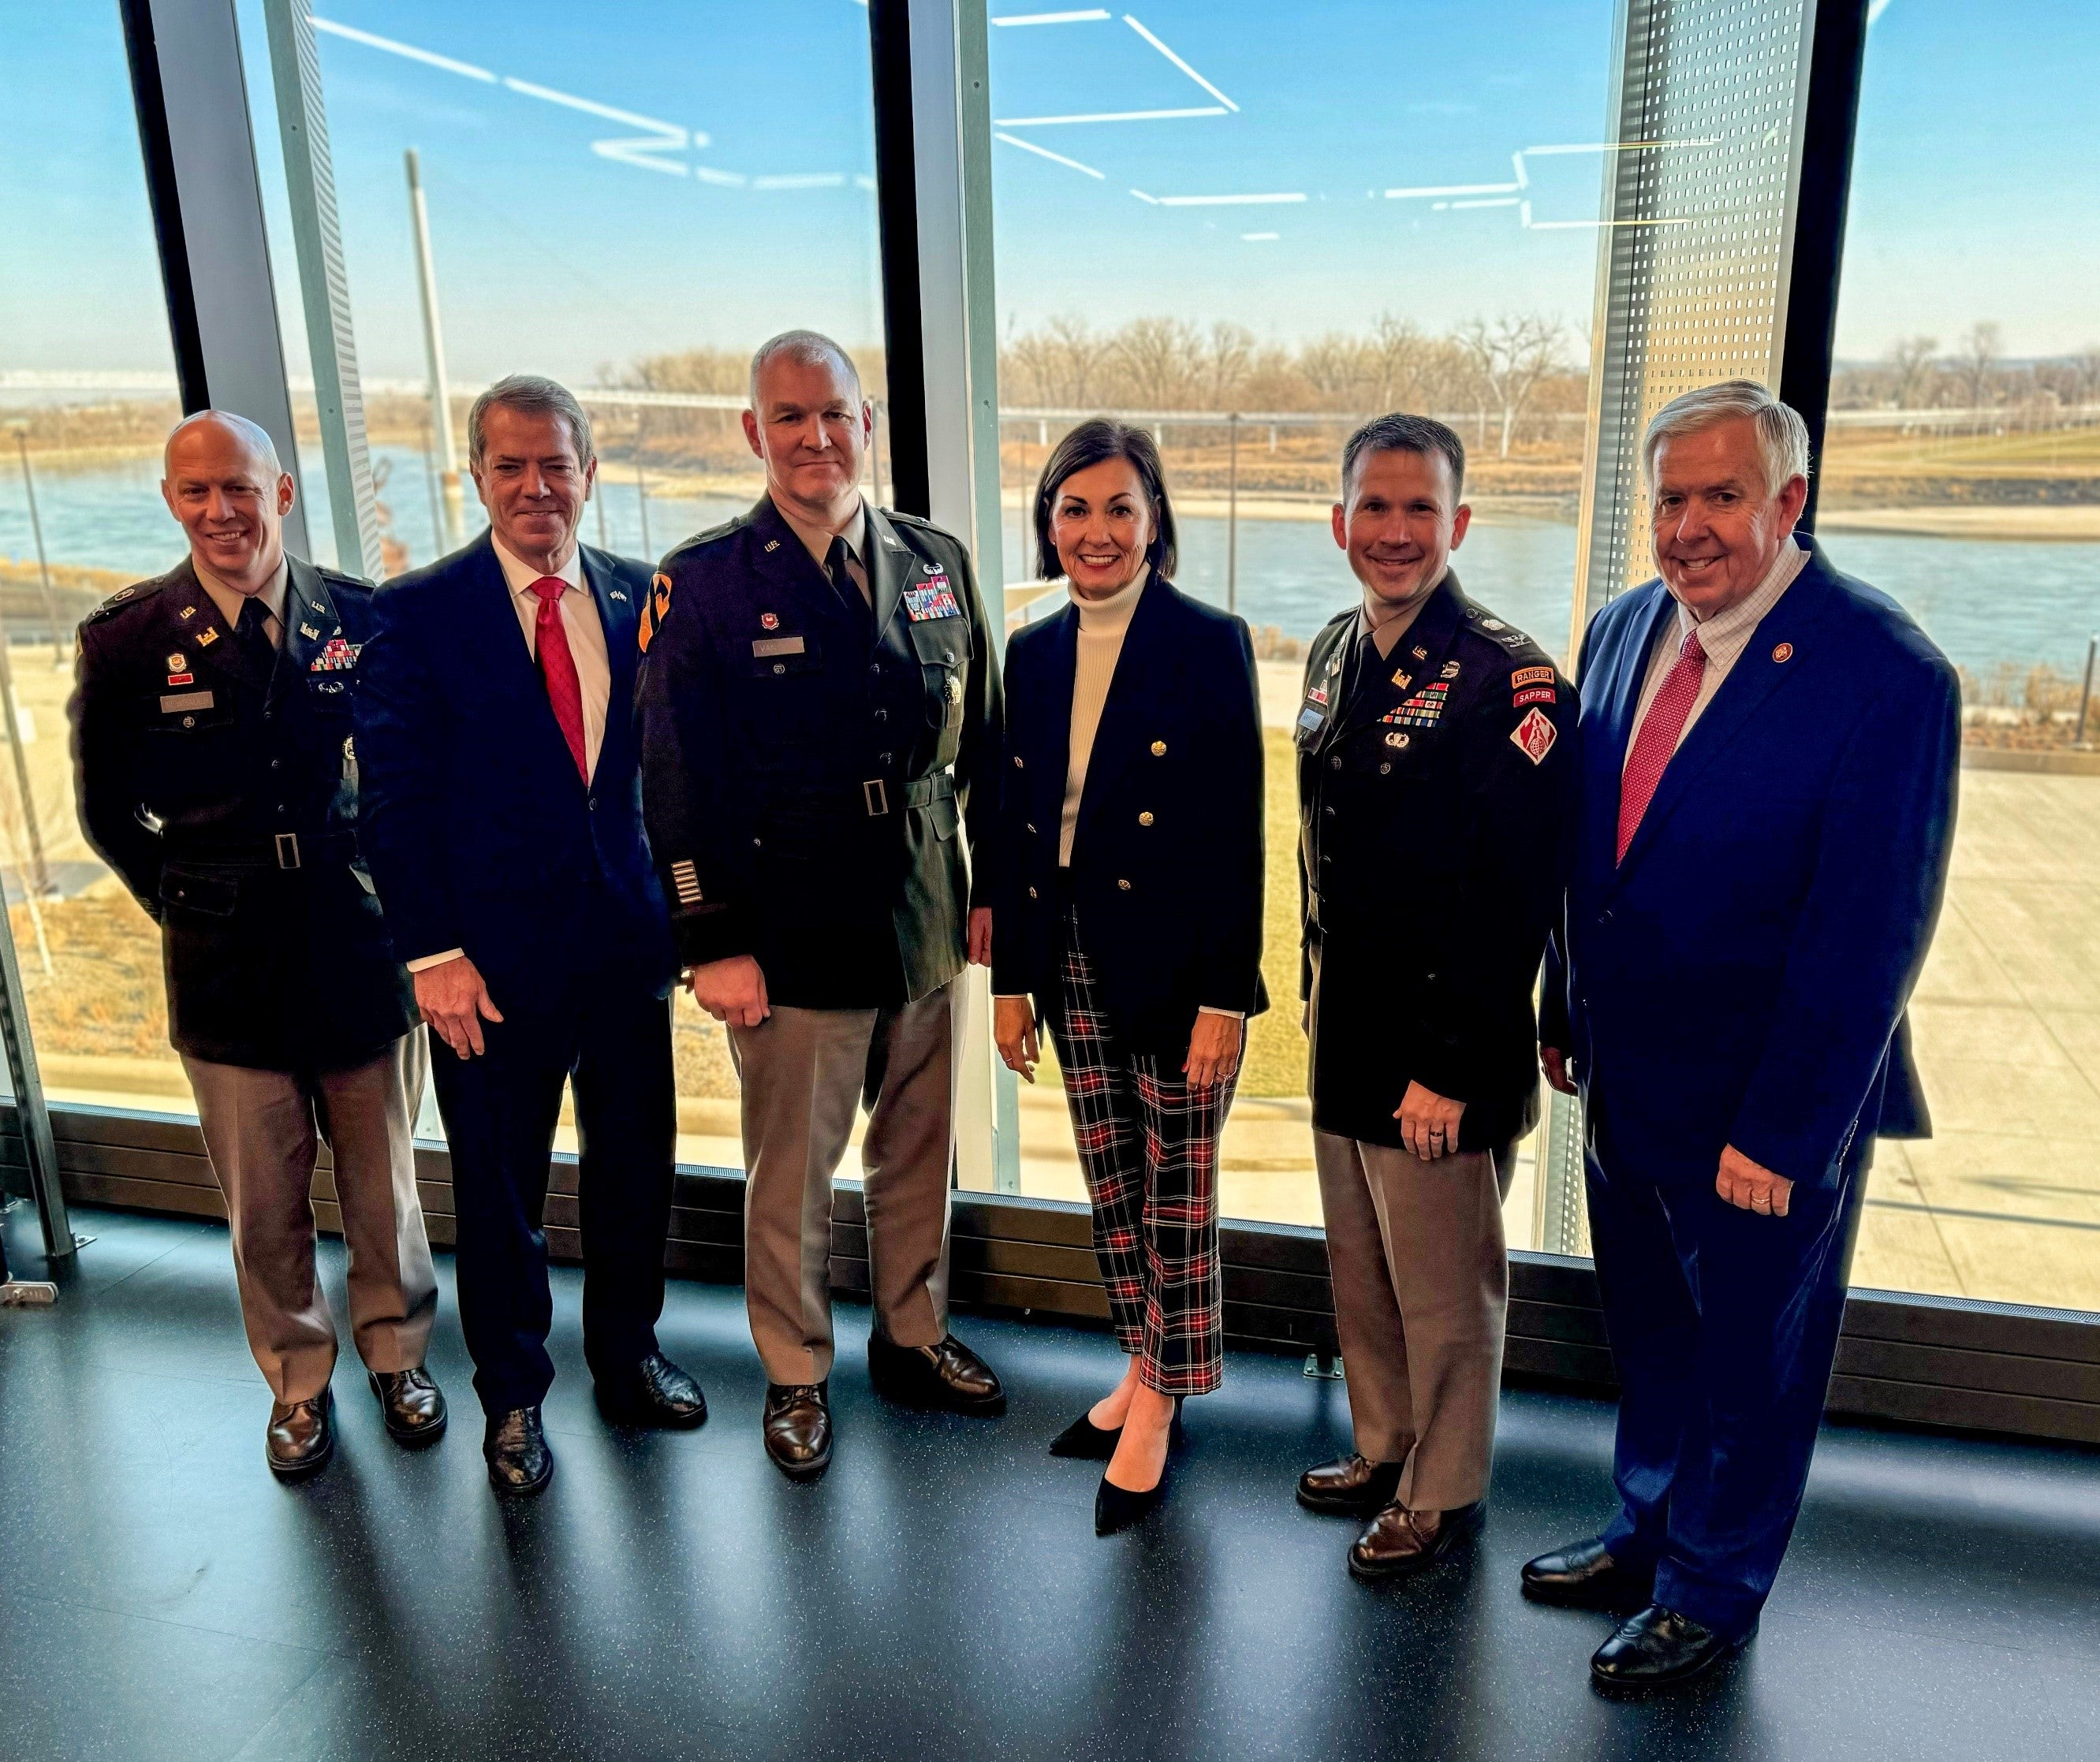 L to R: Colonel Robert Newbauer, Governor Jim Pillen, Brigadier General Geoff Van Epps, Governor Kim Reynolds, Colonel Travis Rayfield, and Governor Mike Parson